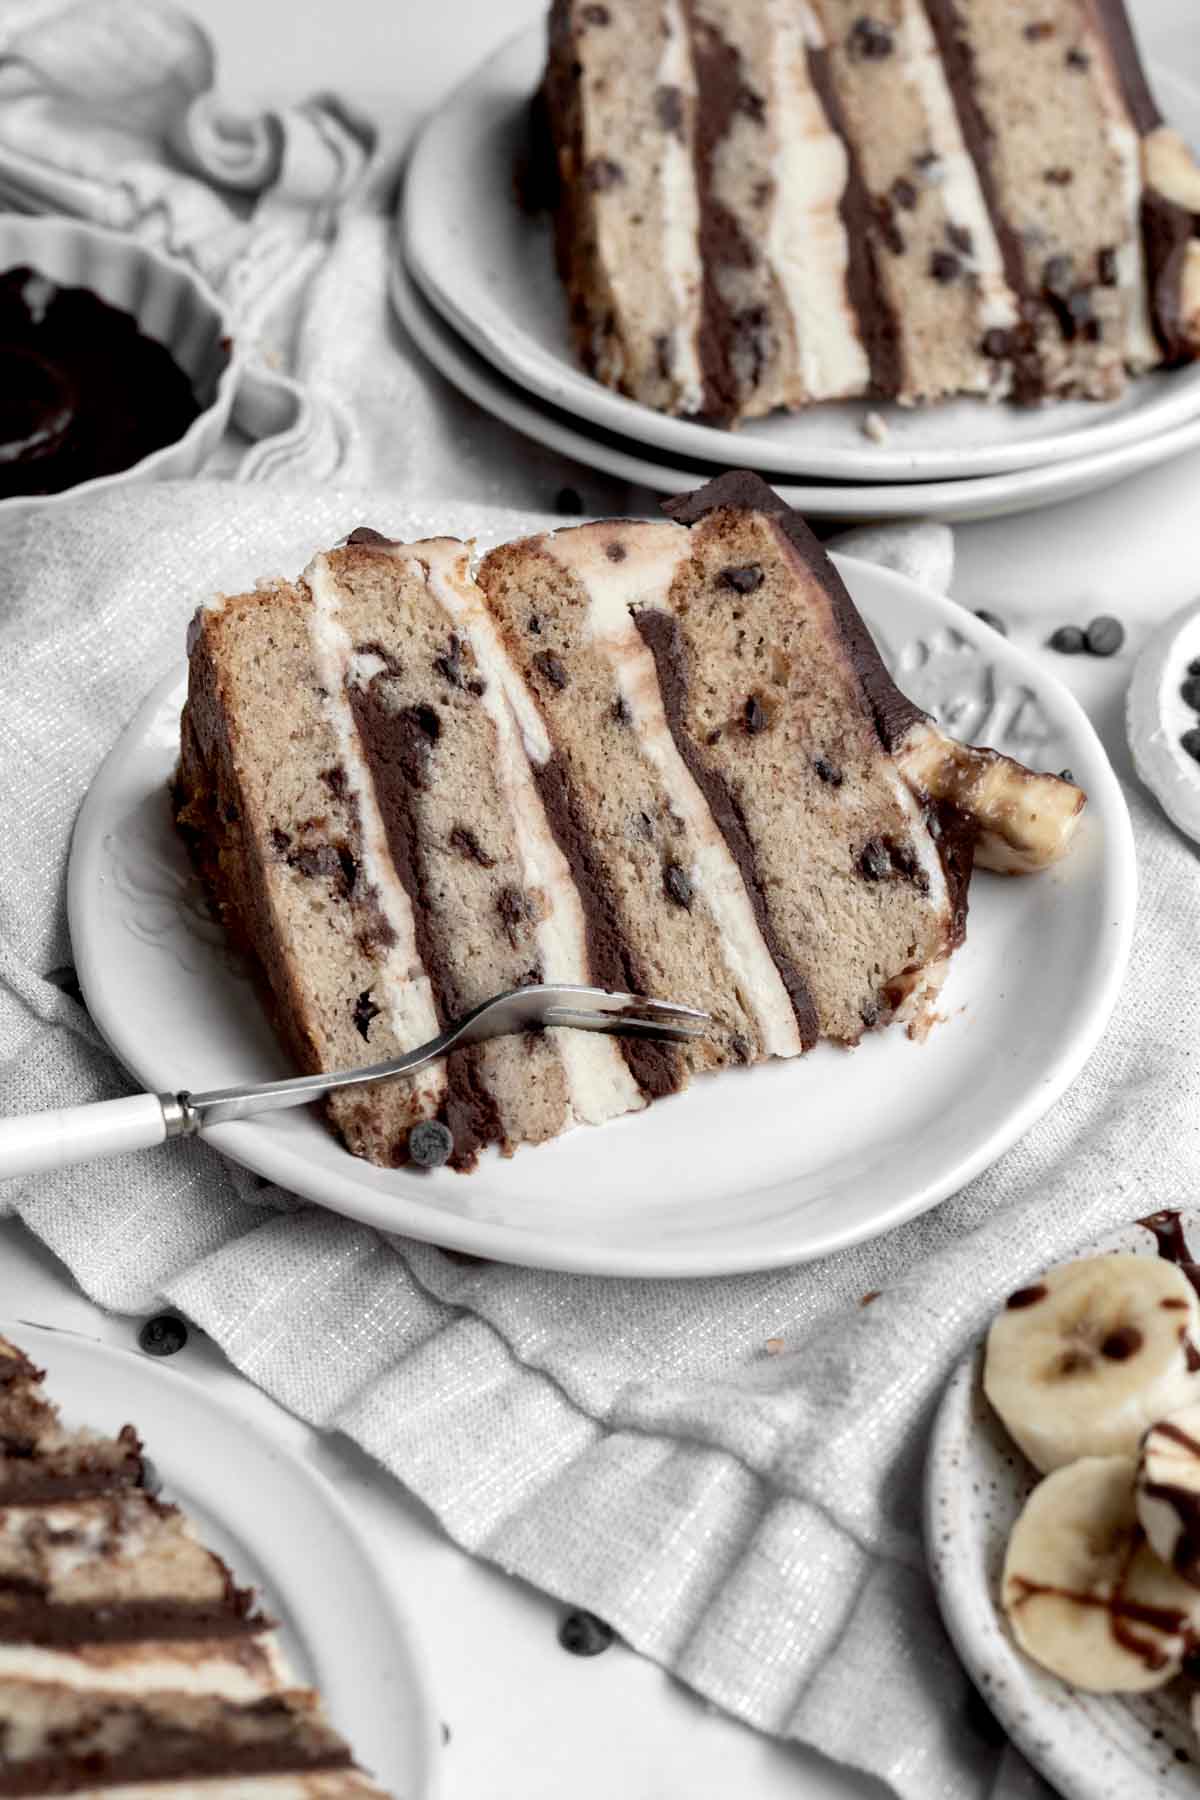 A fork cuts into the layered frosting and chocolate chip cake.